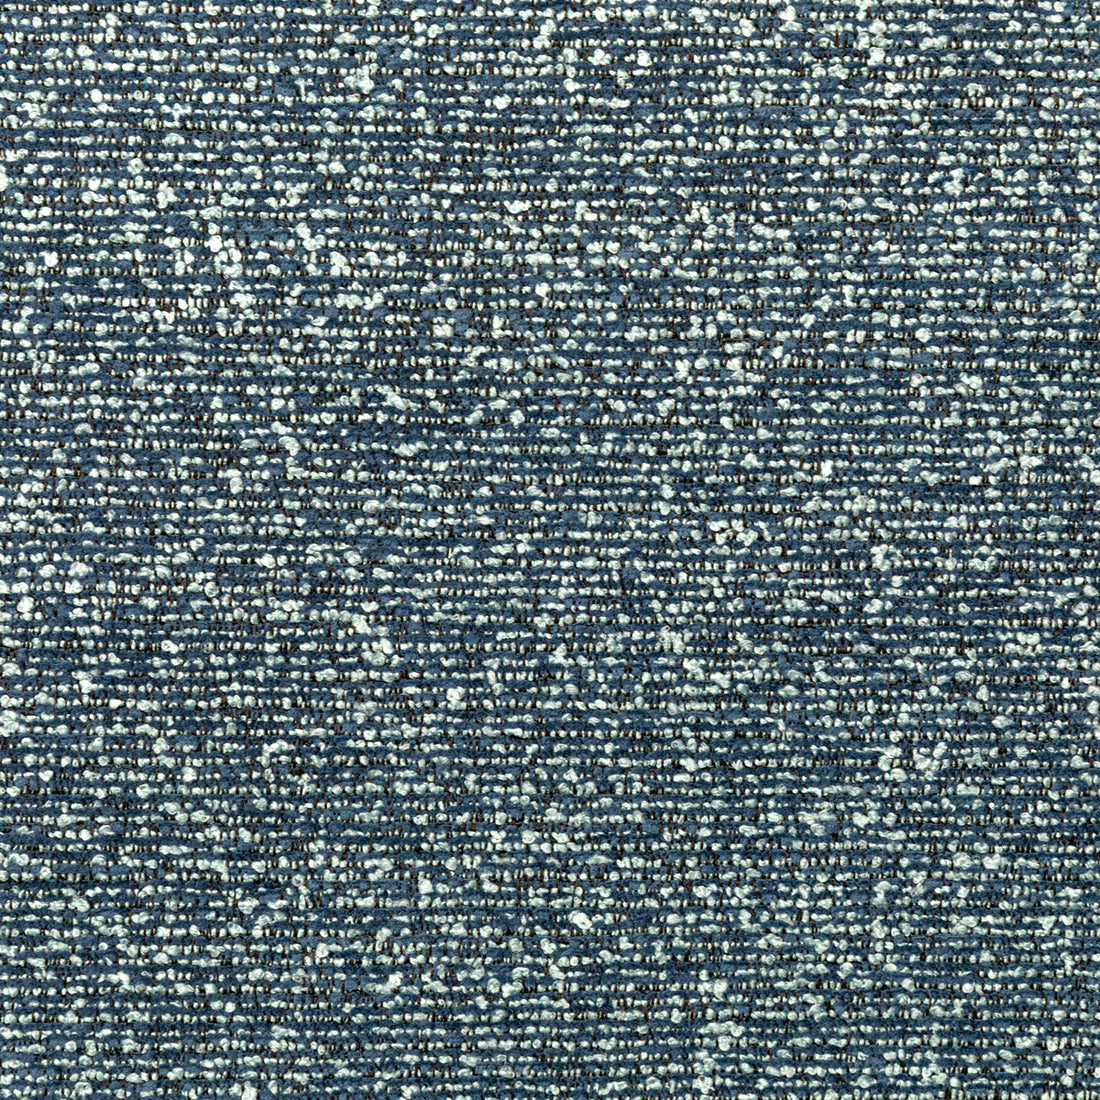 Serenity Now fabric in blue waters color - pattern 36390.513.0 - by Kravet Design in the Crypton Home - Celliant collection